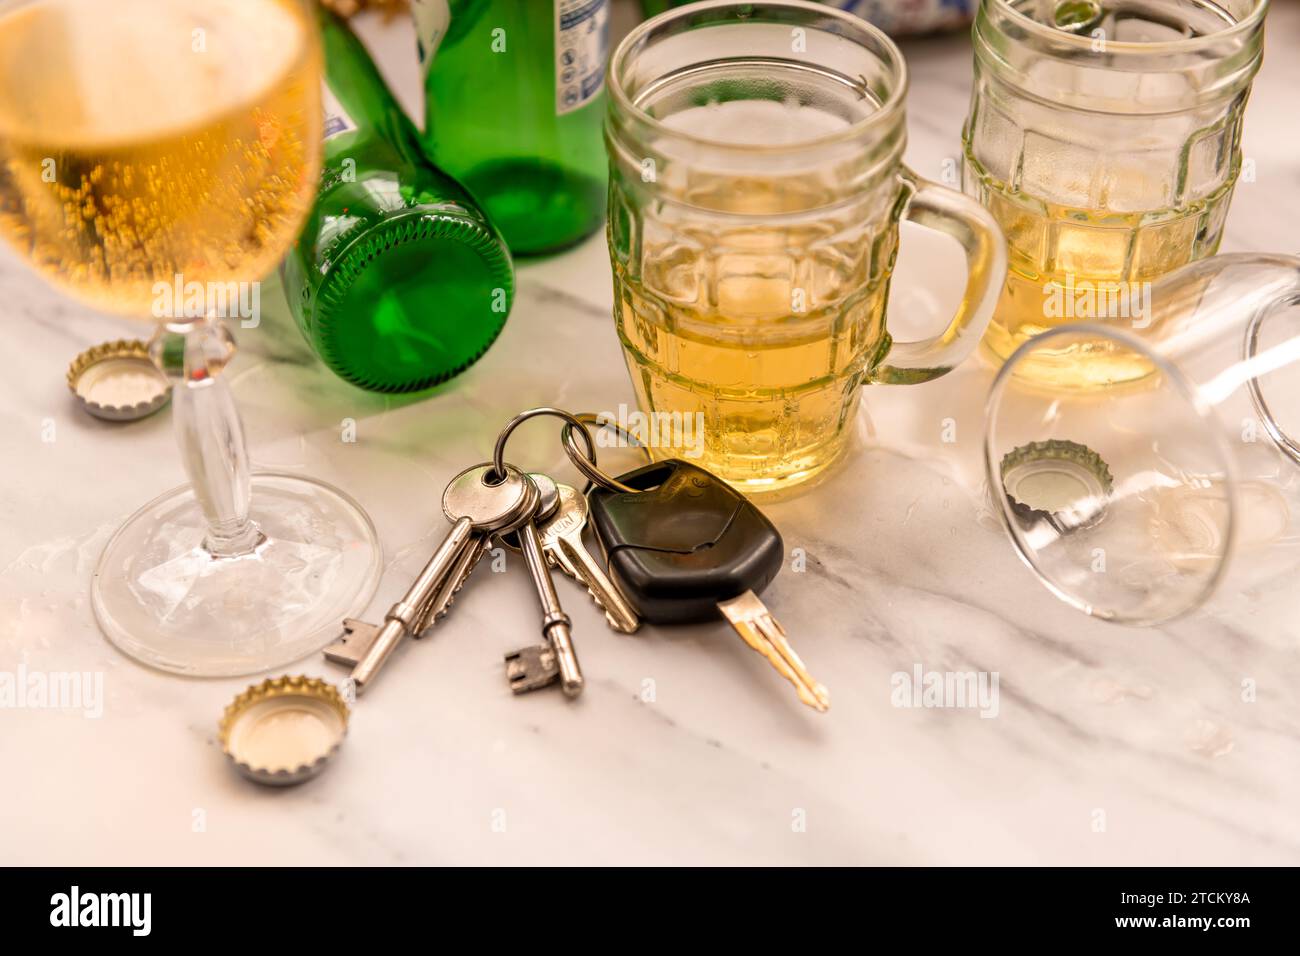 A set of car keys on a table full of glasses of alcoholic drinks and bottles. Drink driving concept. Stock Photo